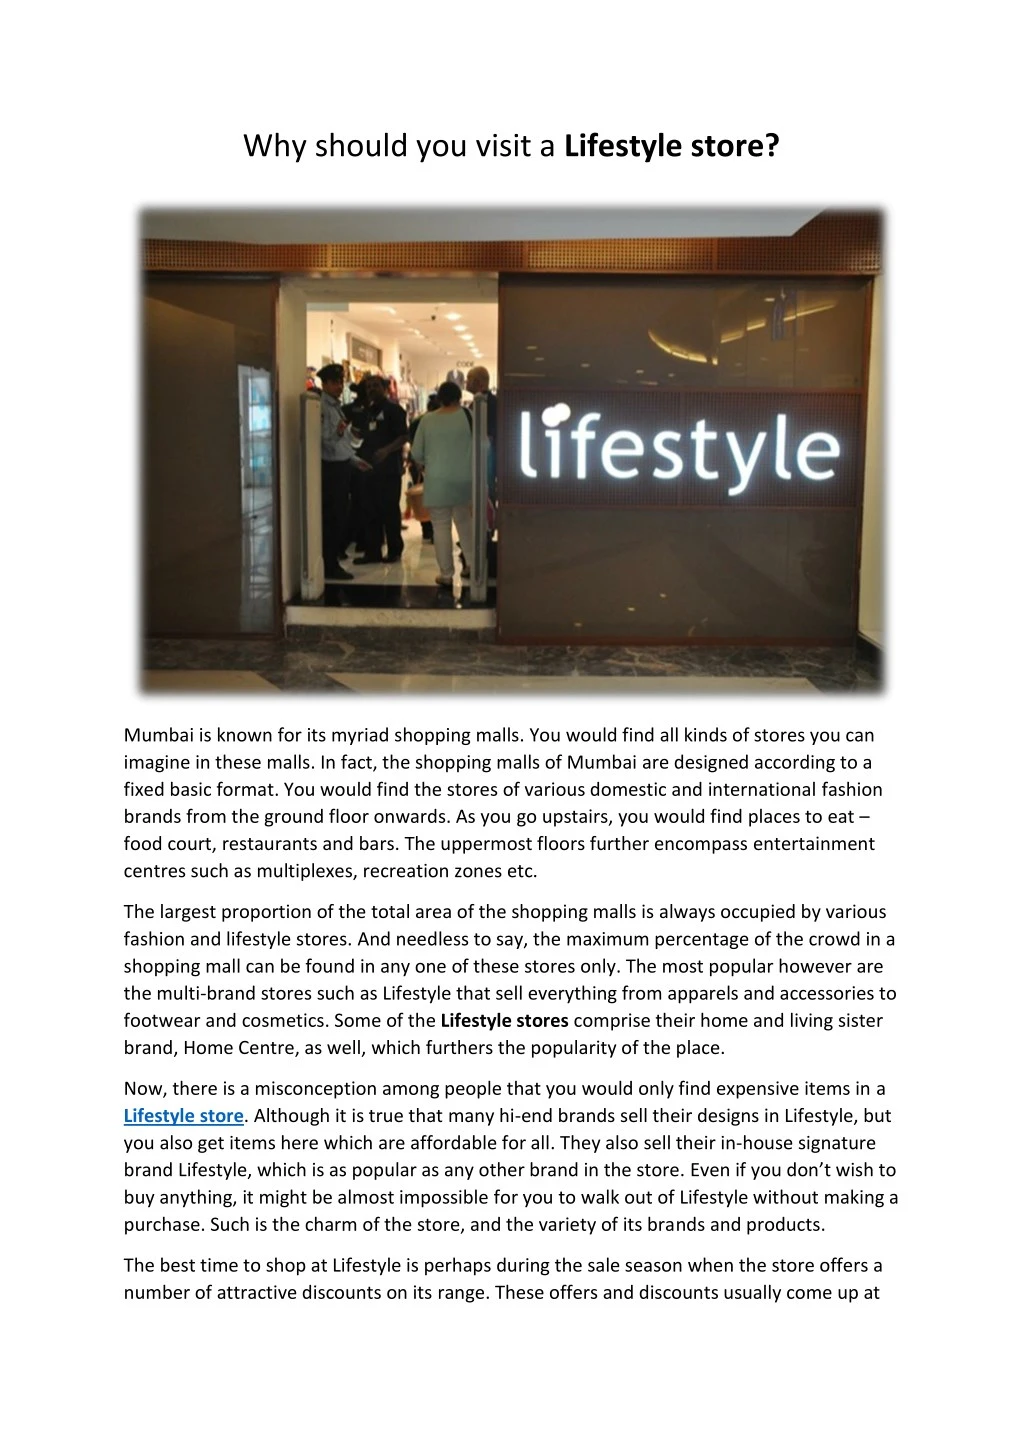 why should you visit a lifestyle store